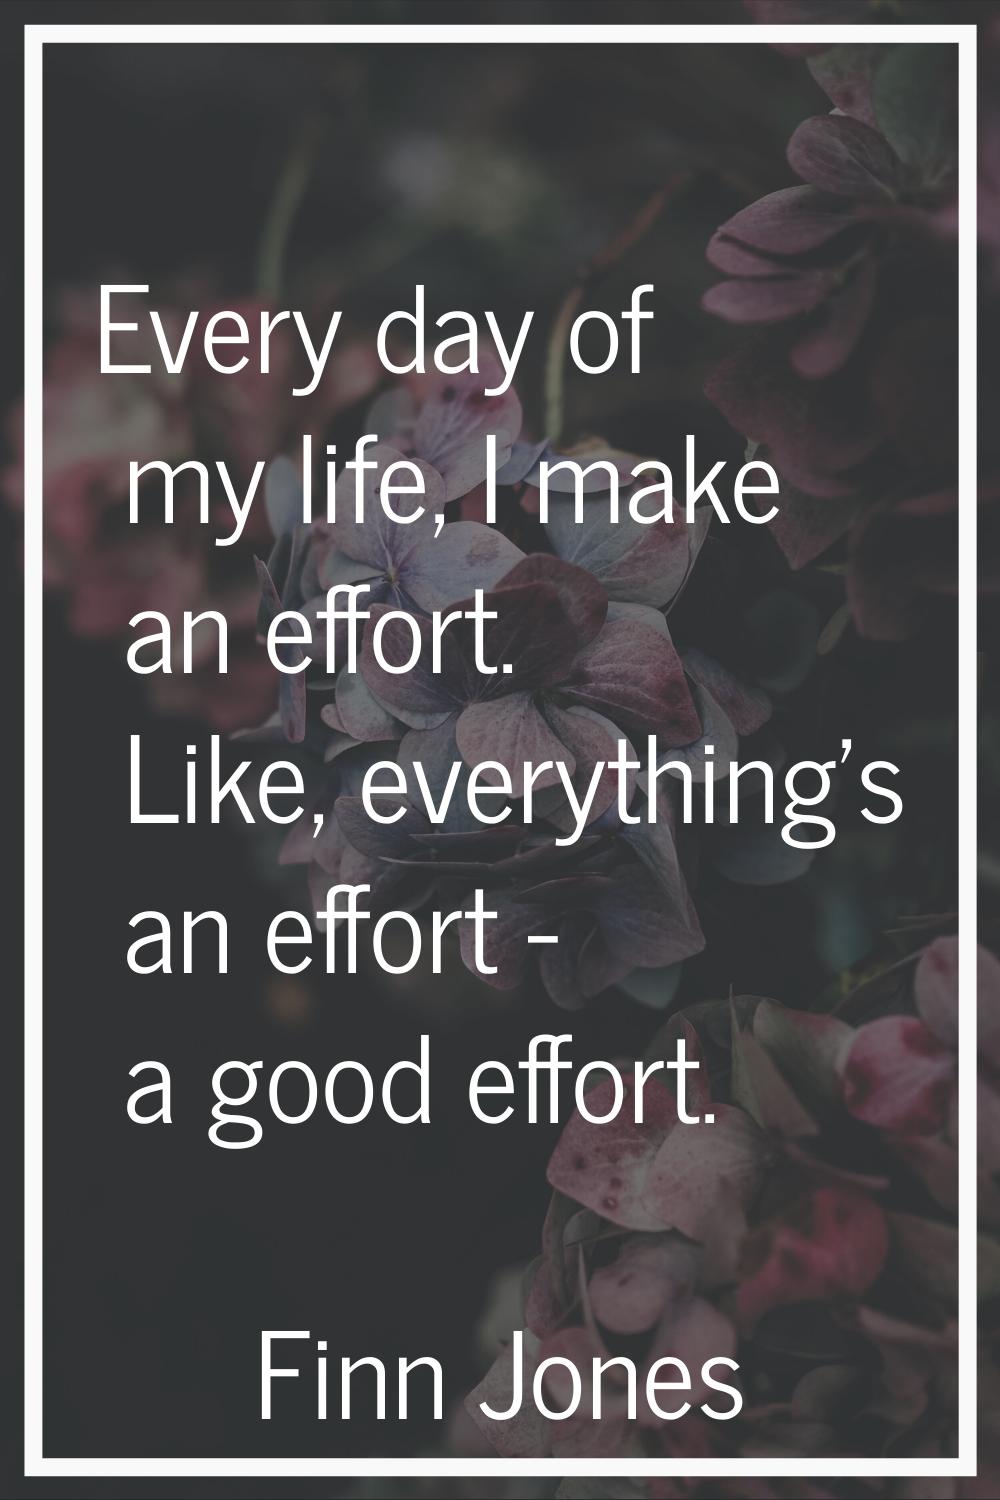 Every day of my life, I make an effort. Like, everything's an effort - a good effort.